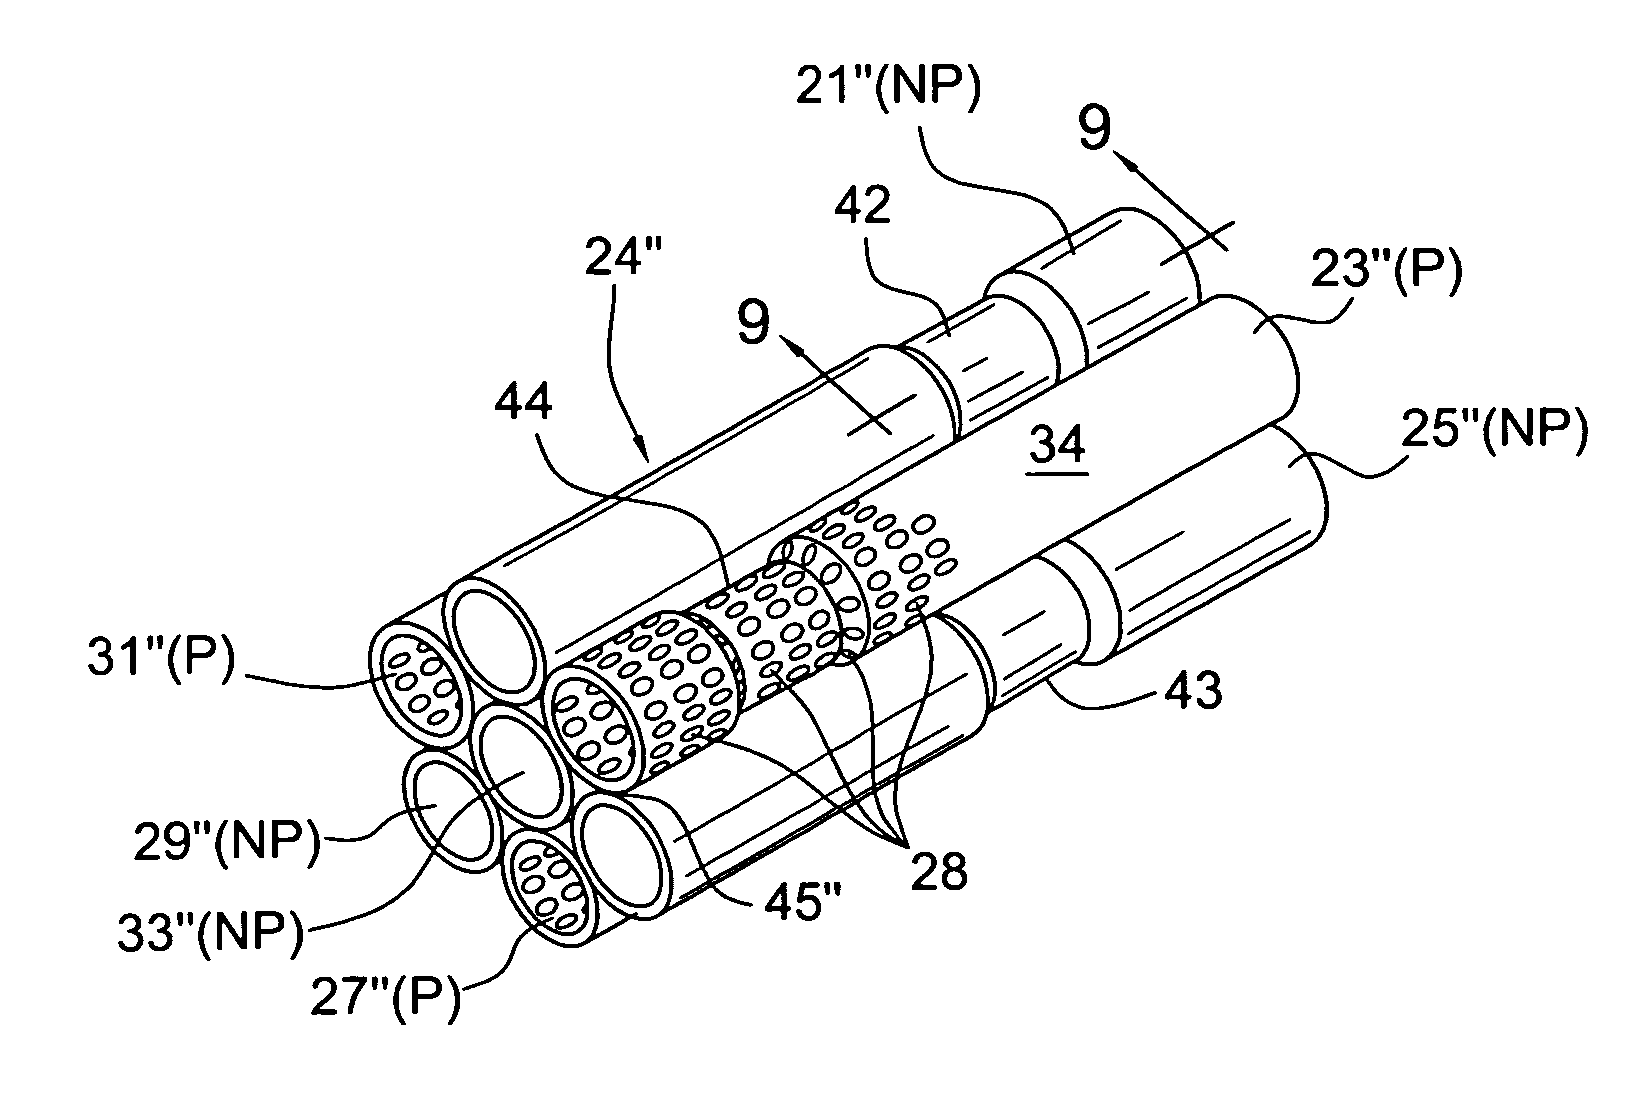 Exhaust muffler for internal combustion engines